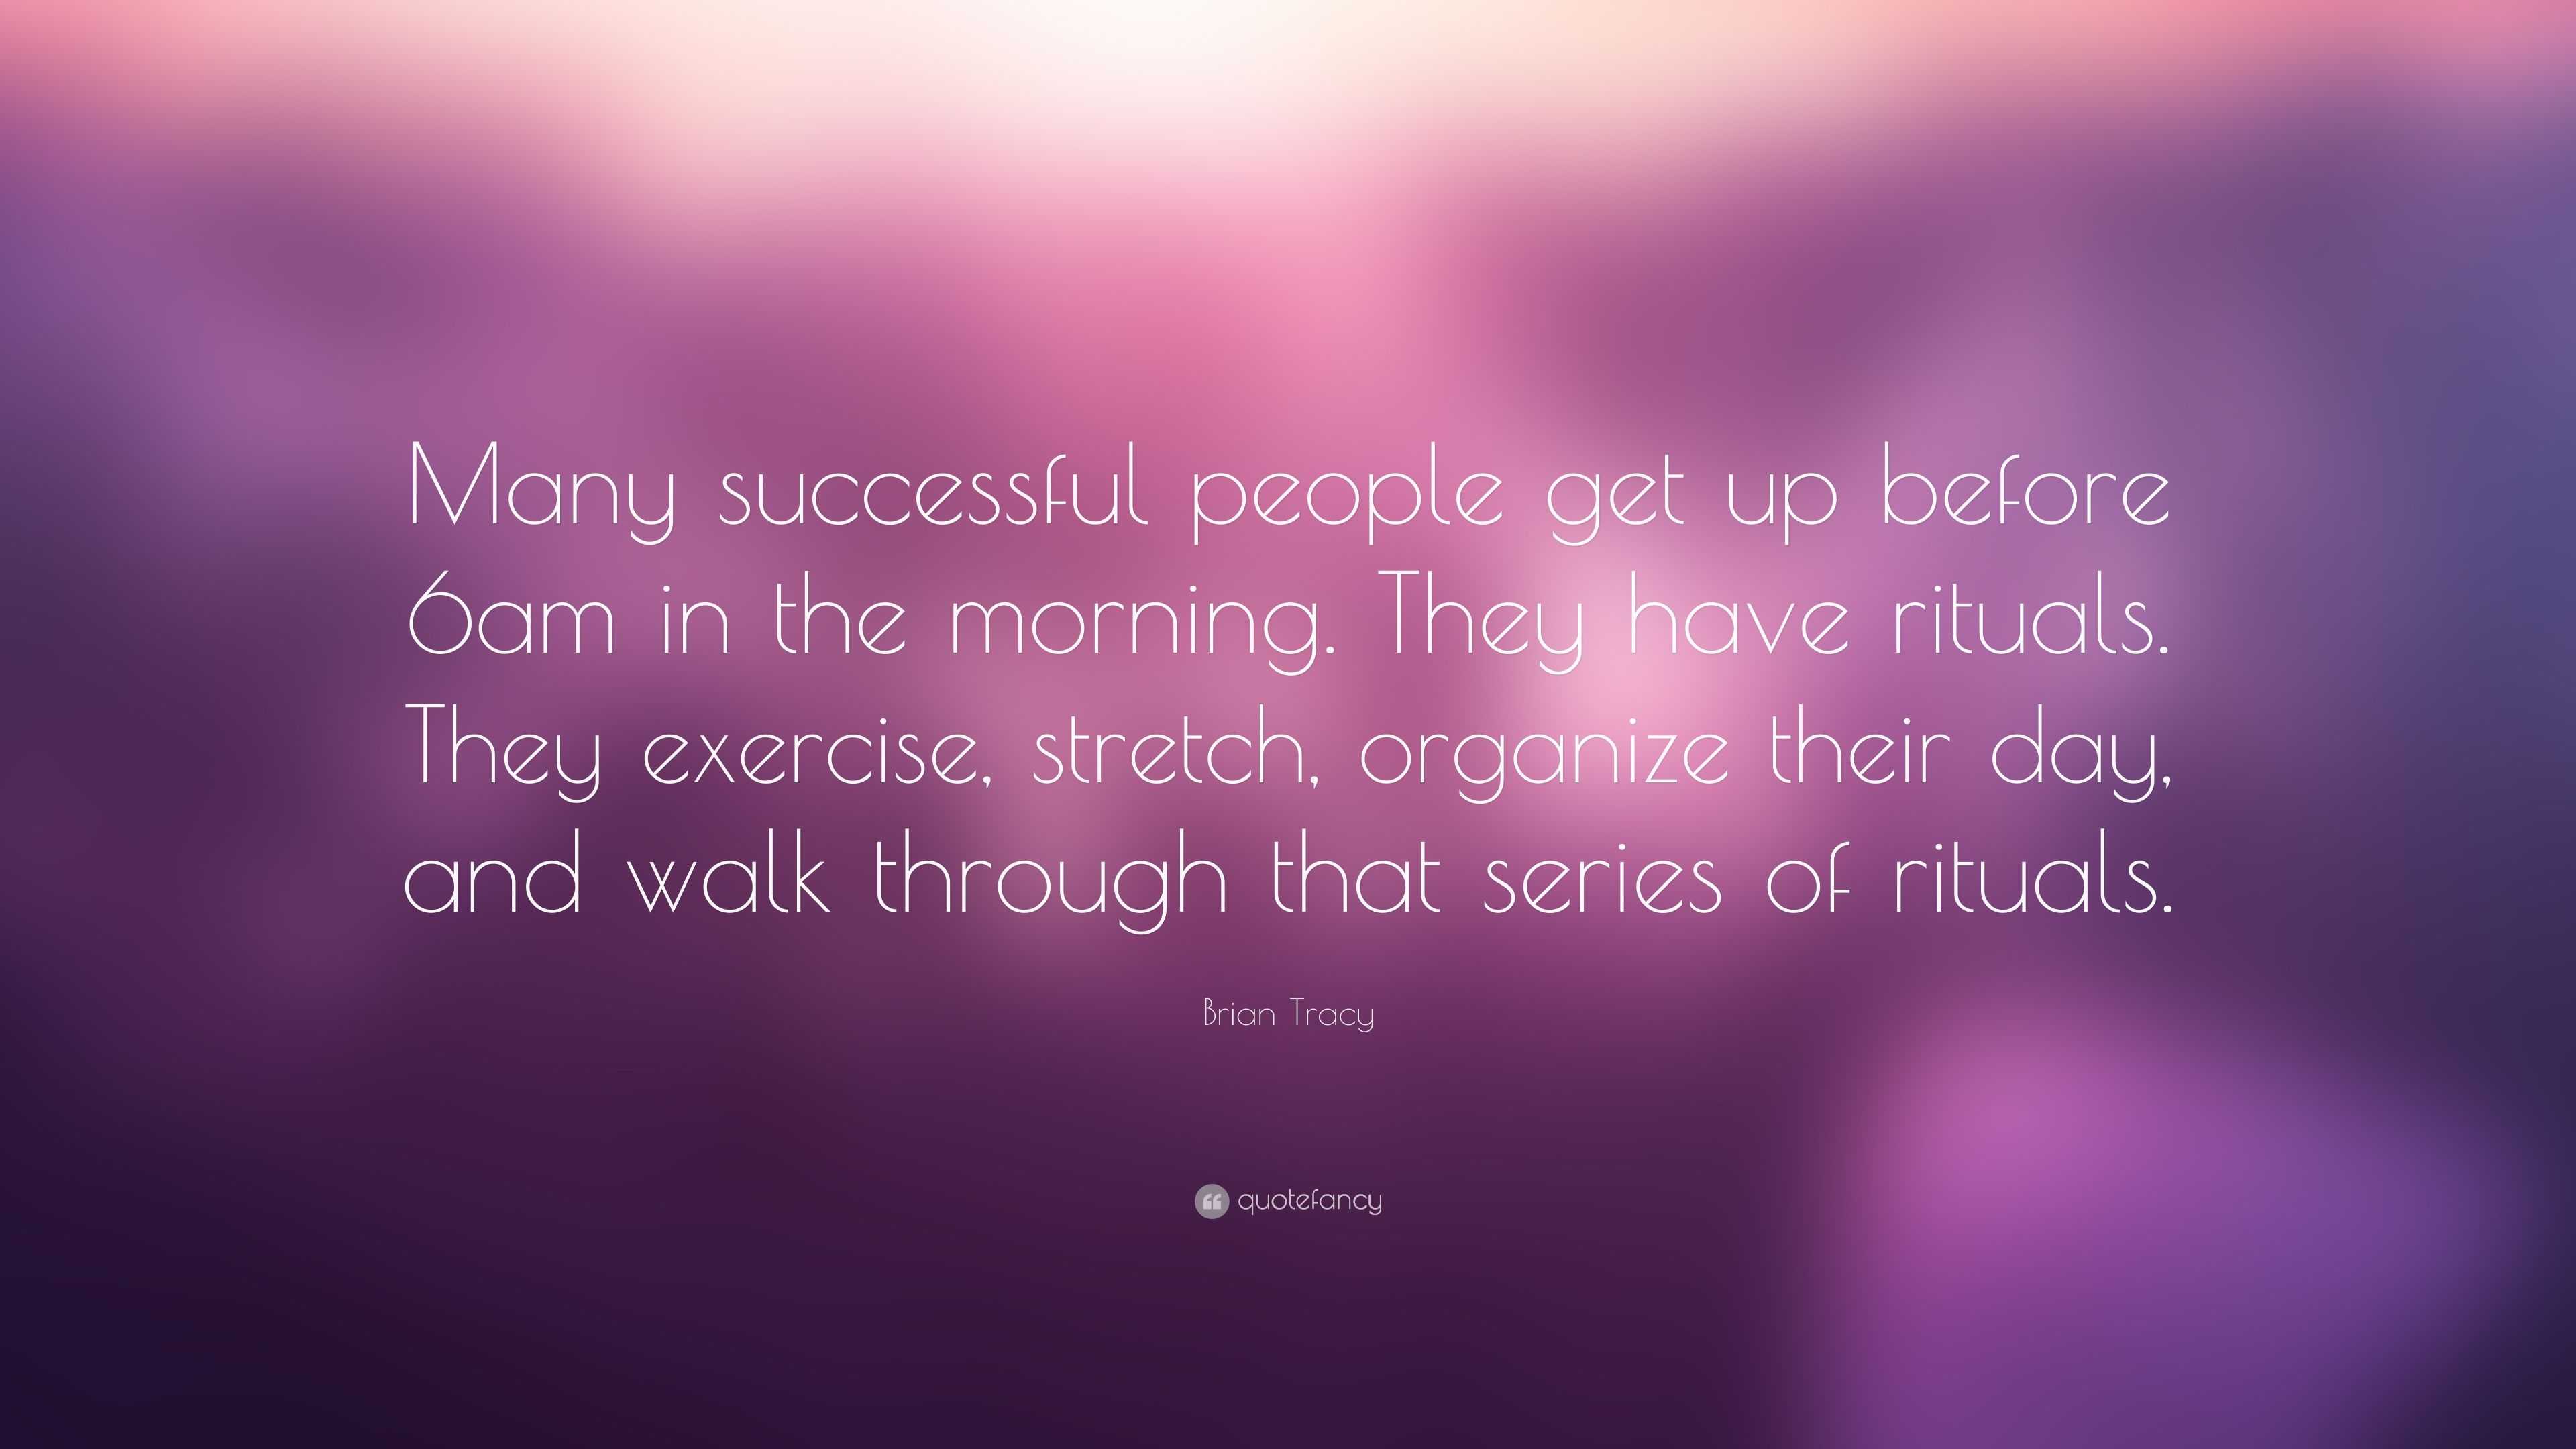 Brian Tracy Quote: “Many successful people get up before 6am in the ...